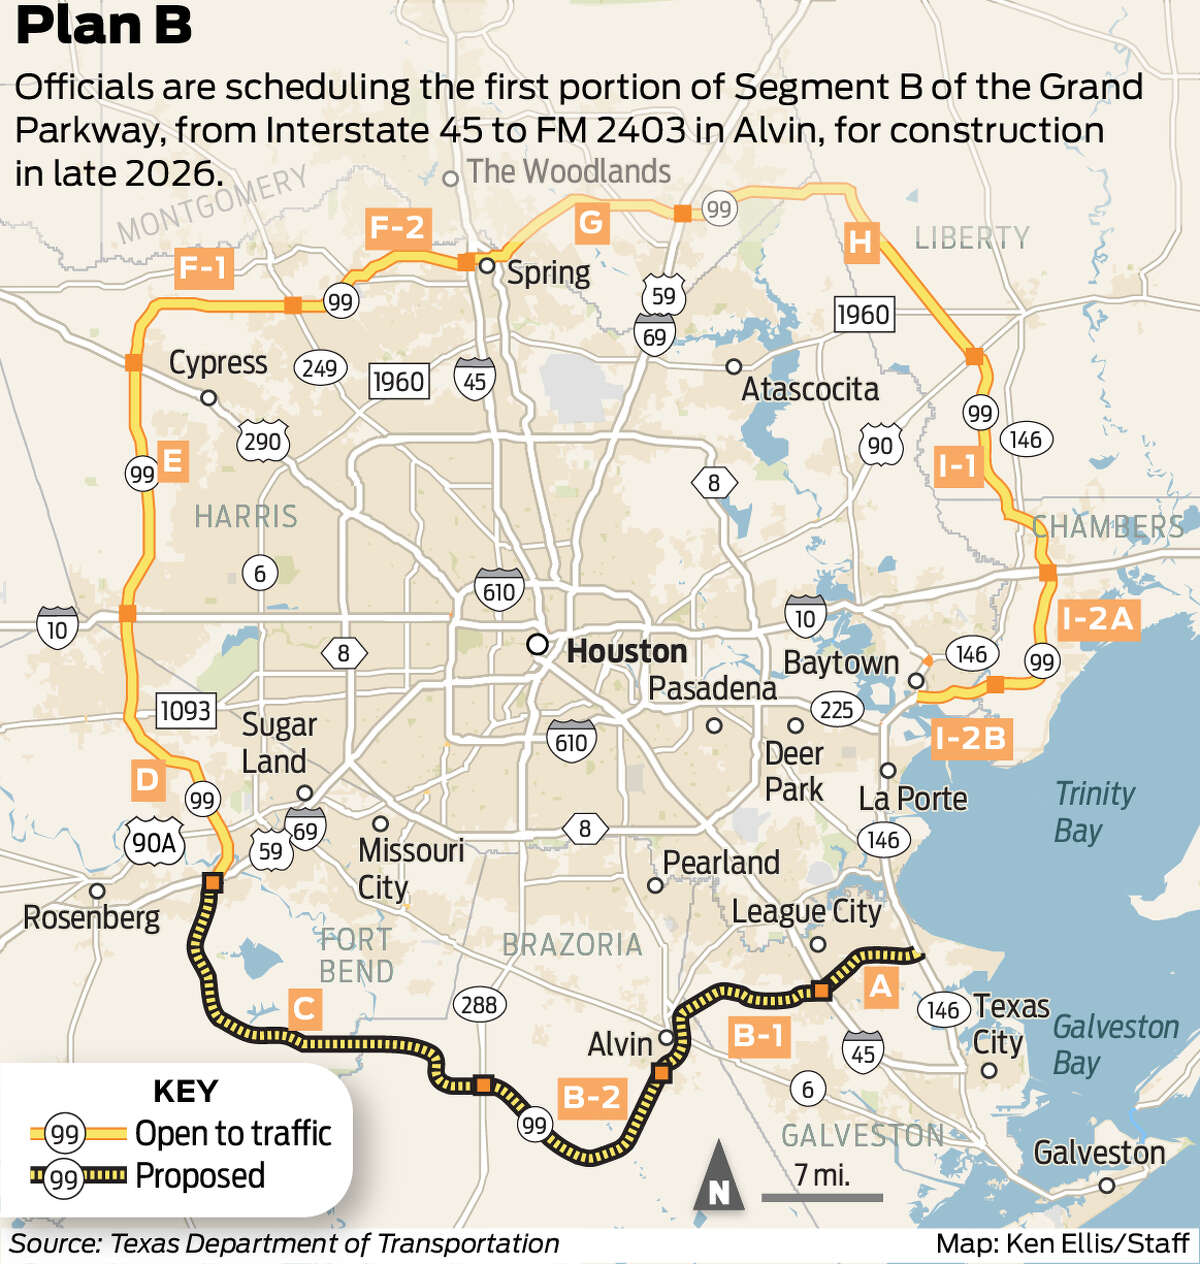 i-45-to-alvin-segment-of-grand-parkway-set-for-late-2026-start